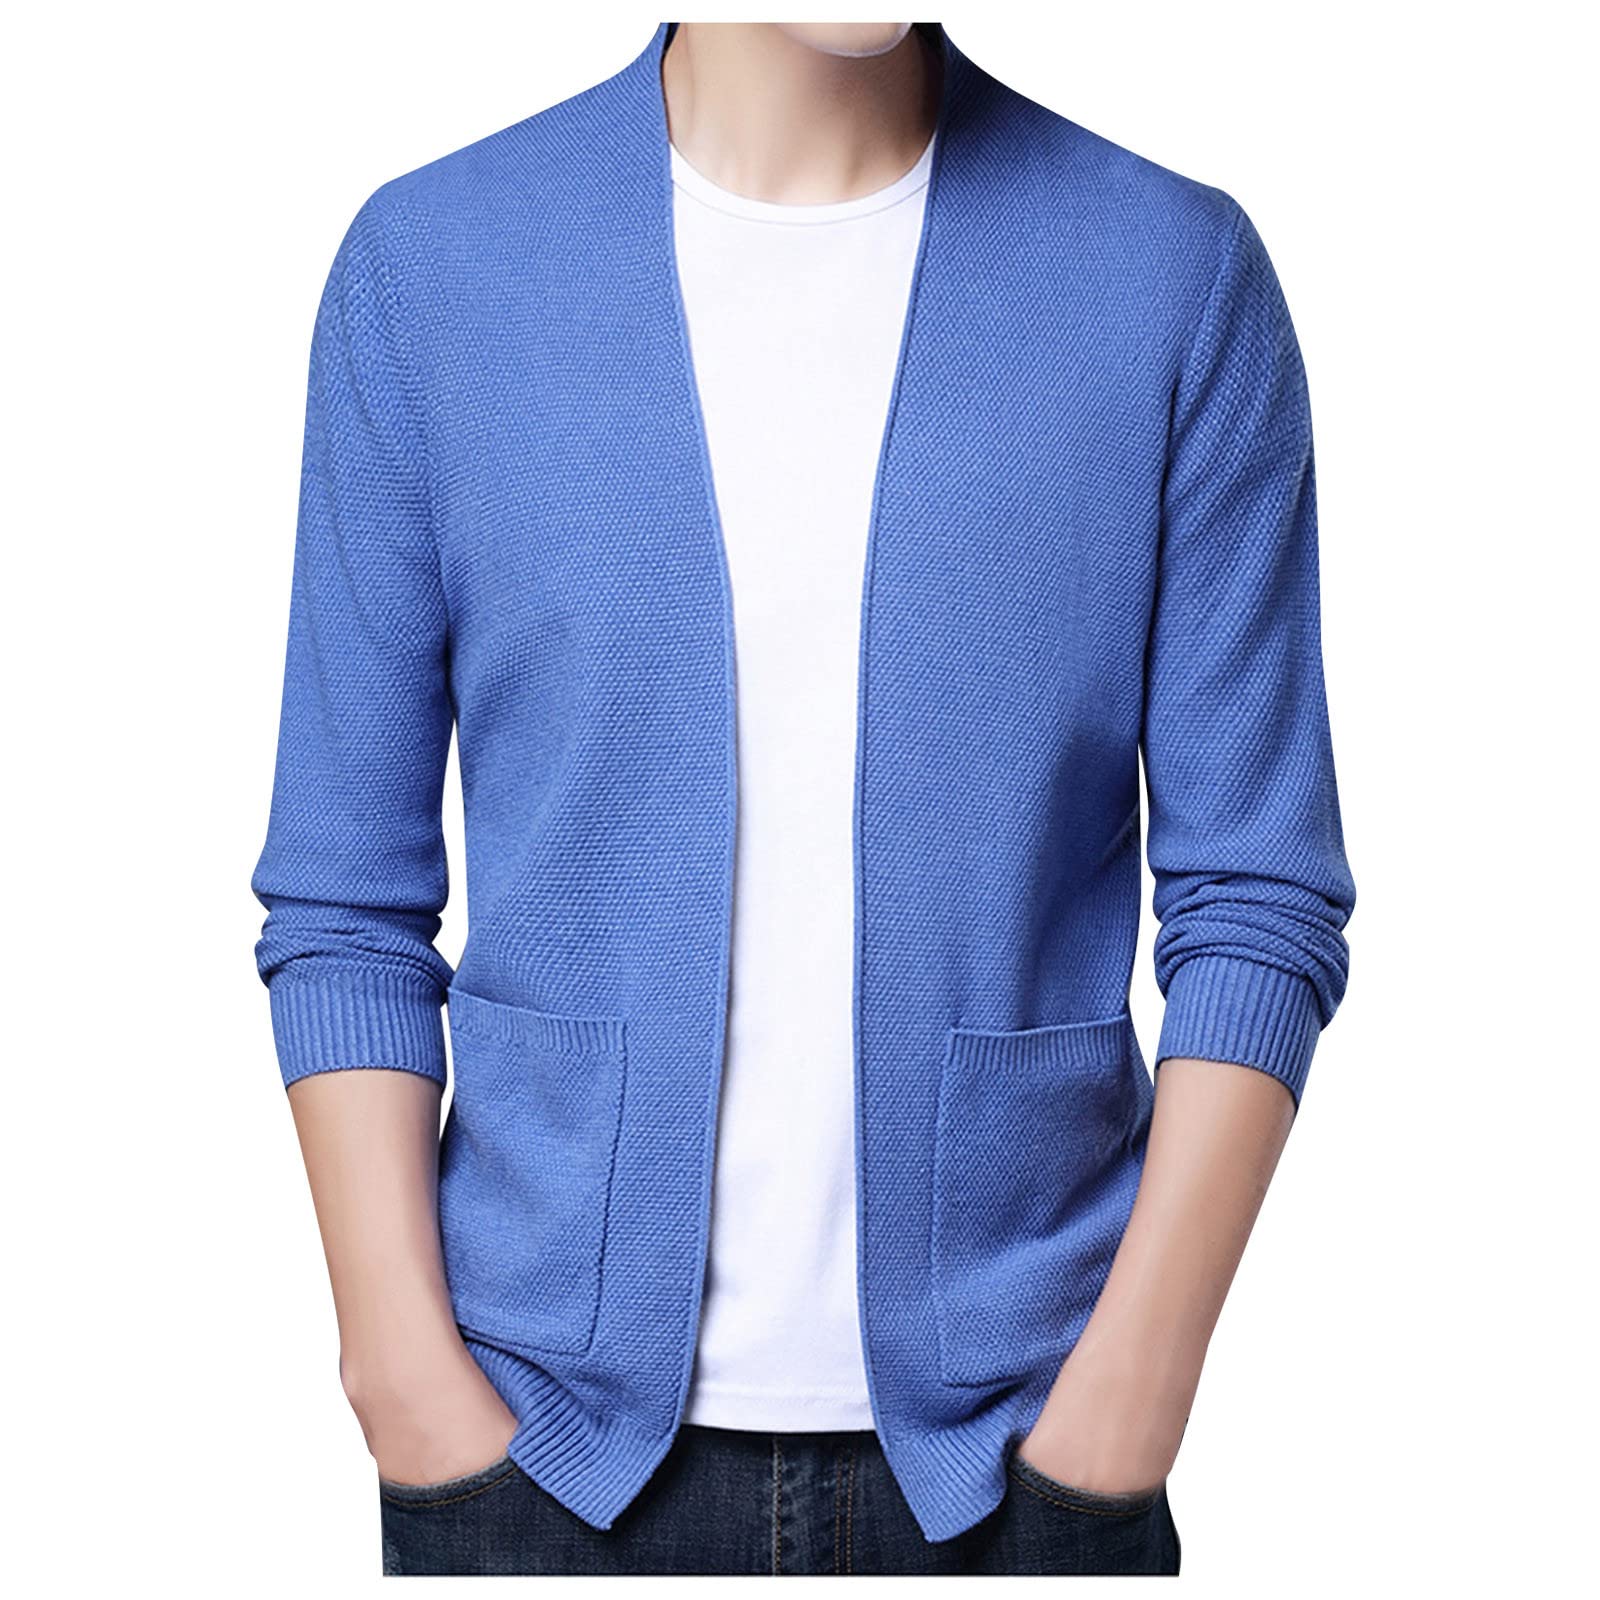 Men's Long Sleeved Knitted Cardigan With True Pocket